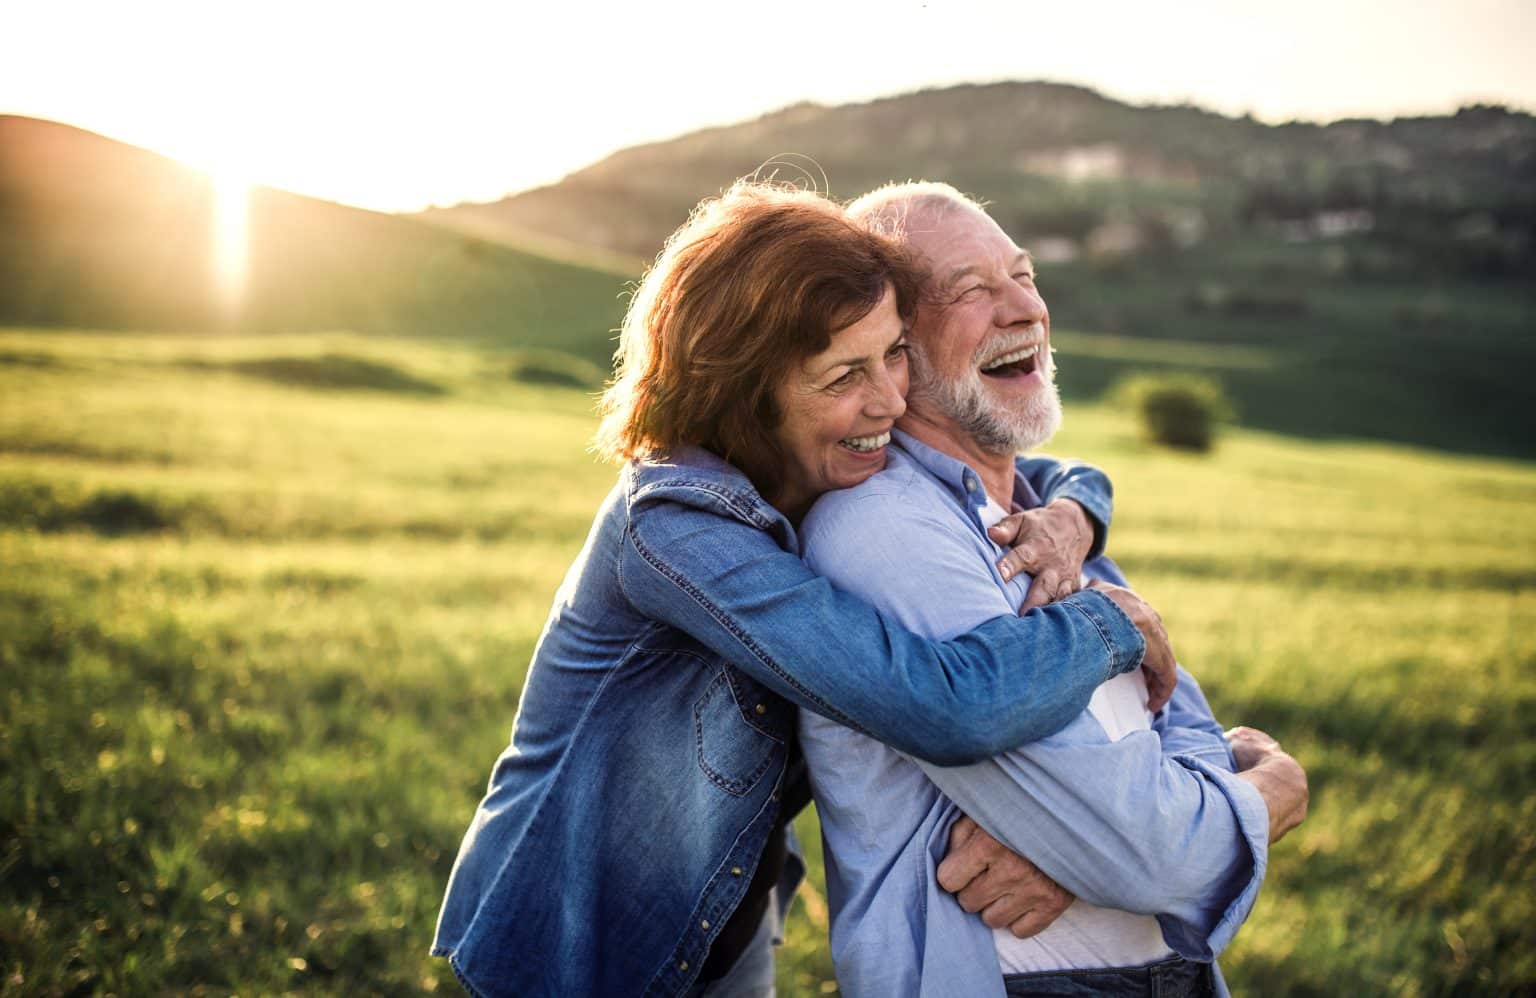 Woman holds a man in a field from behind. He is leaning into her and laughing with his arms crossed. Her arms are draped over his shoulders. She is smiling and the sun is going down on the hillside behind them. 